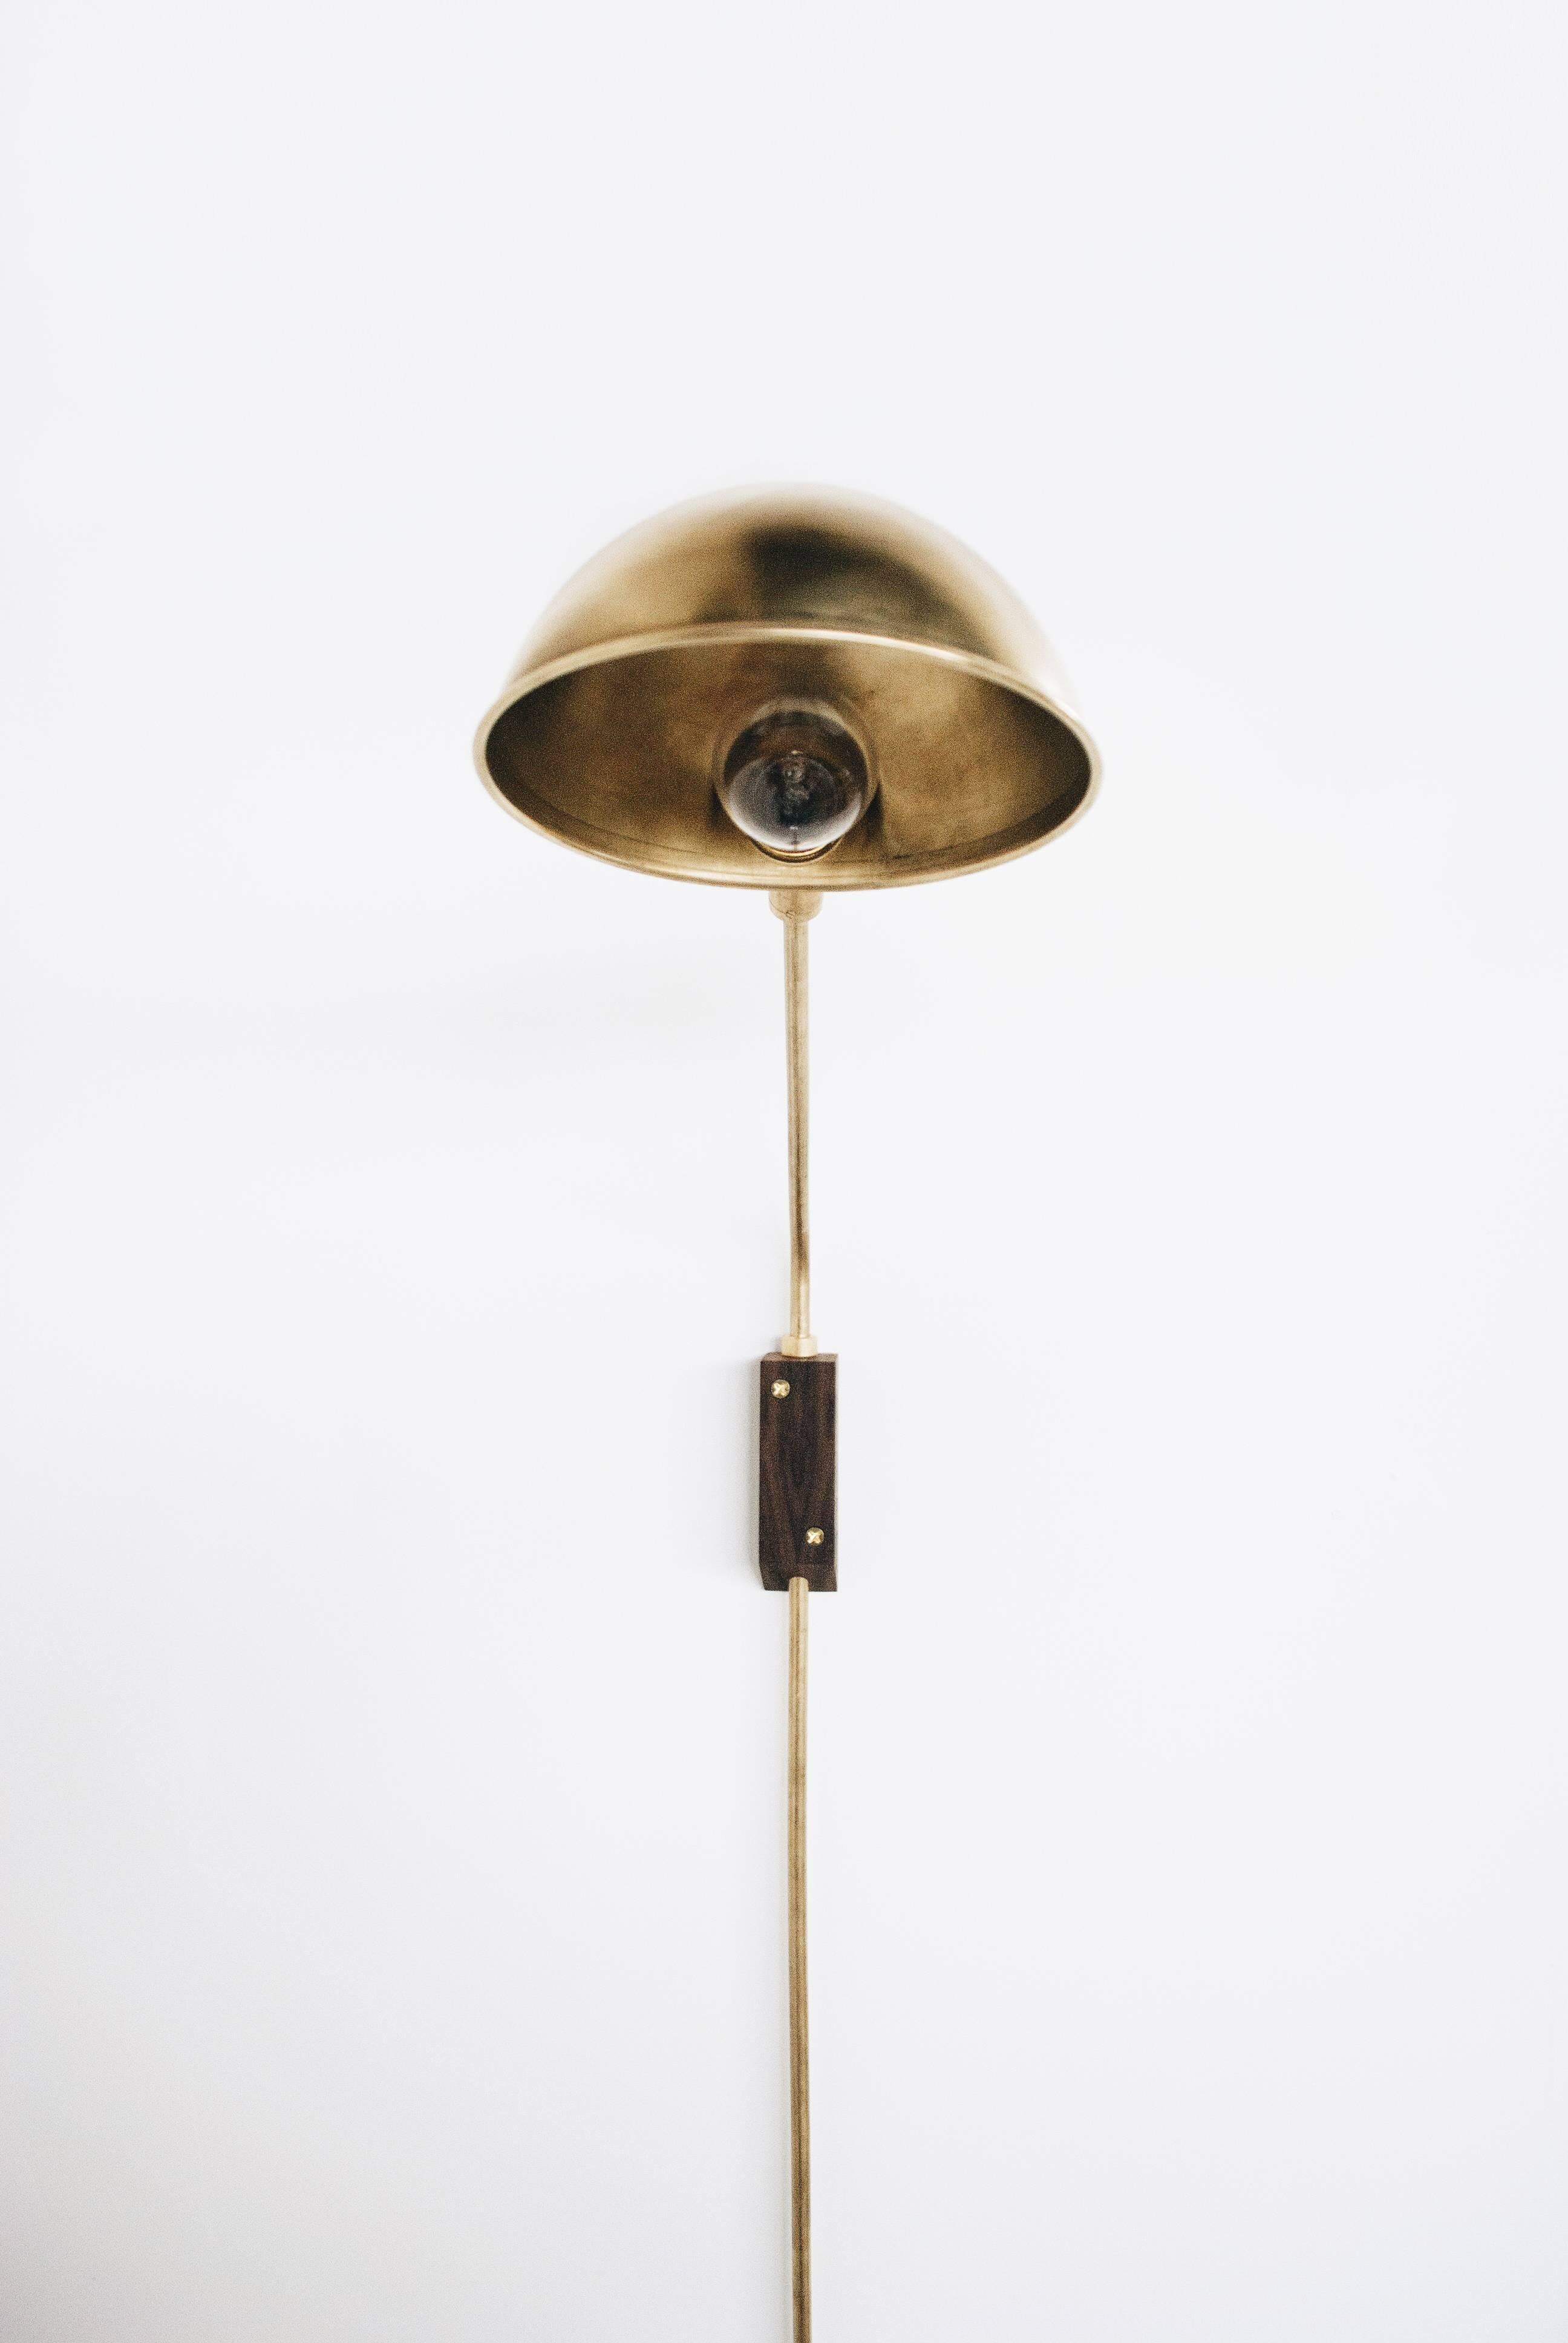 This wall-mounted lamp is comprised of an independently-swiveling arm with a clamp that makes ideal for reading in bed or lighting art. The darkened brass rods can be adjusted in every possible direction making this a very versatile lamp. This lamp